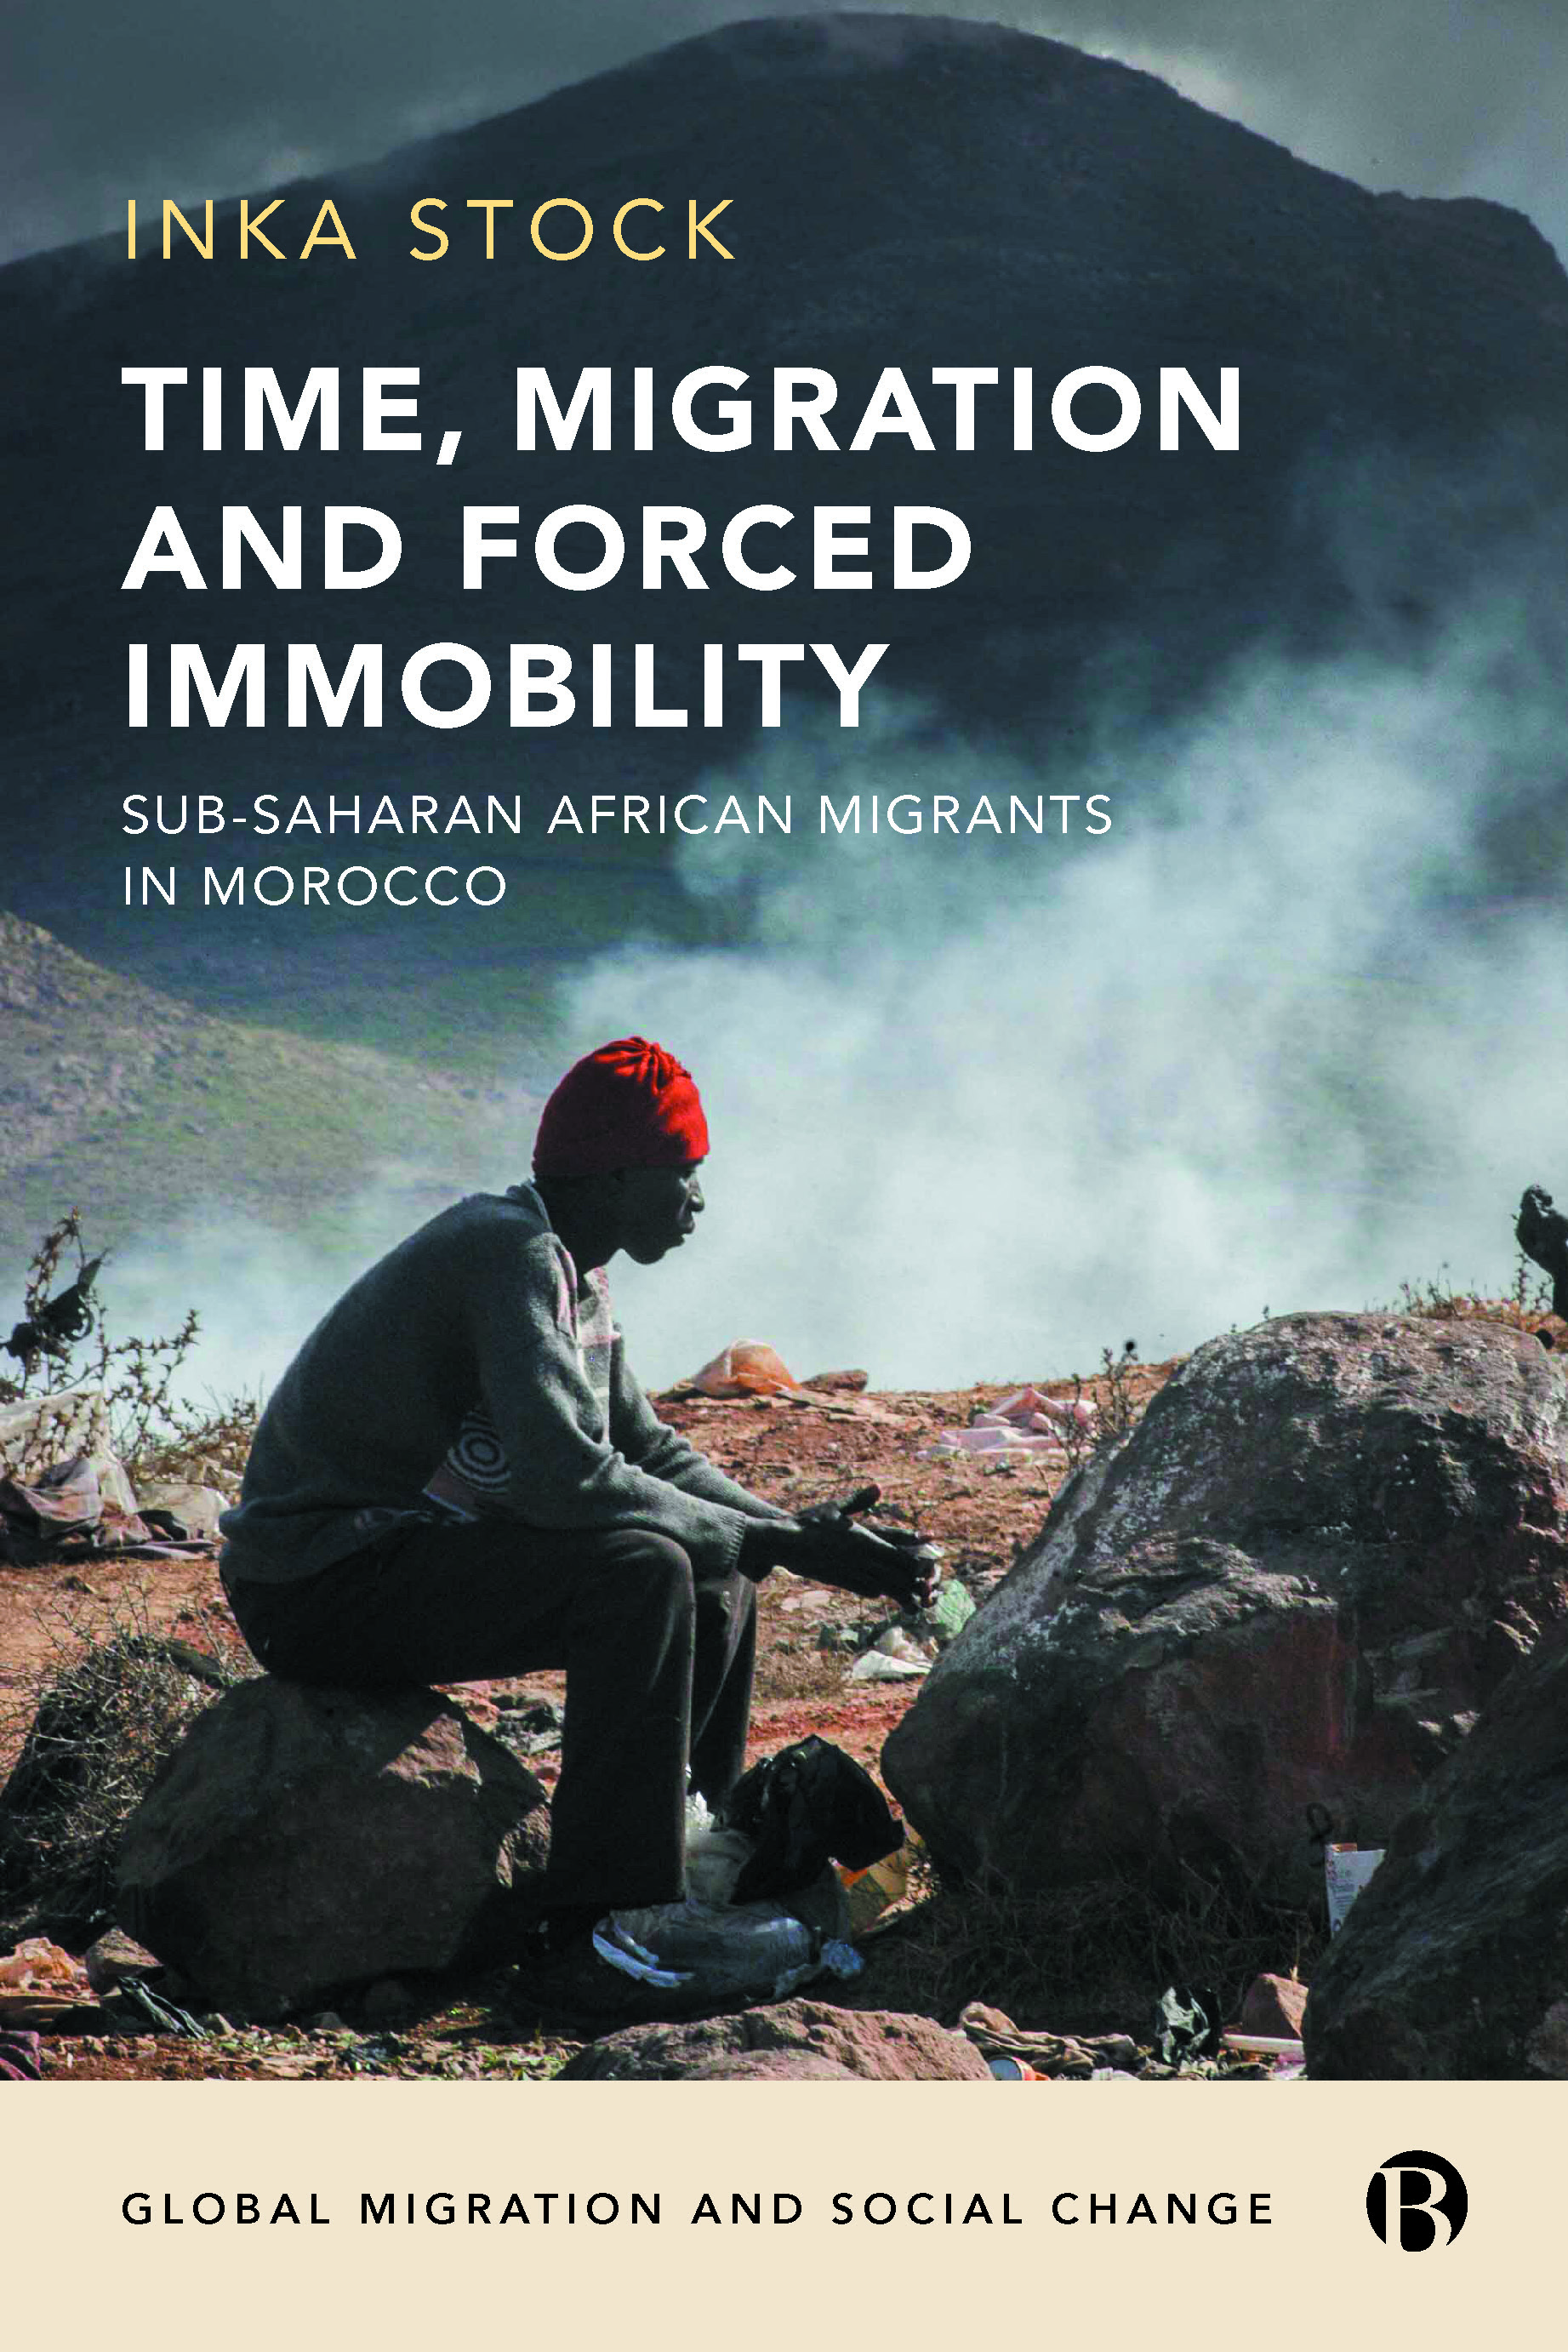 cover image of the book; man sitting on a rock next to a mountain range in Sub-Saharan Africa